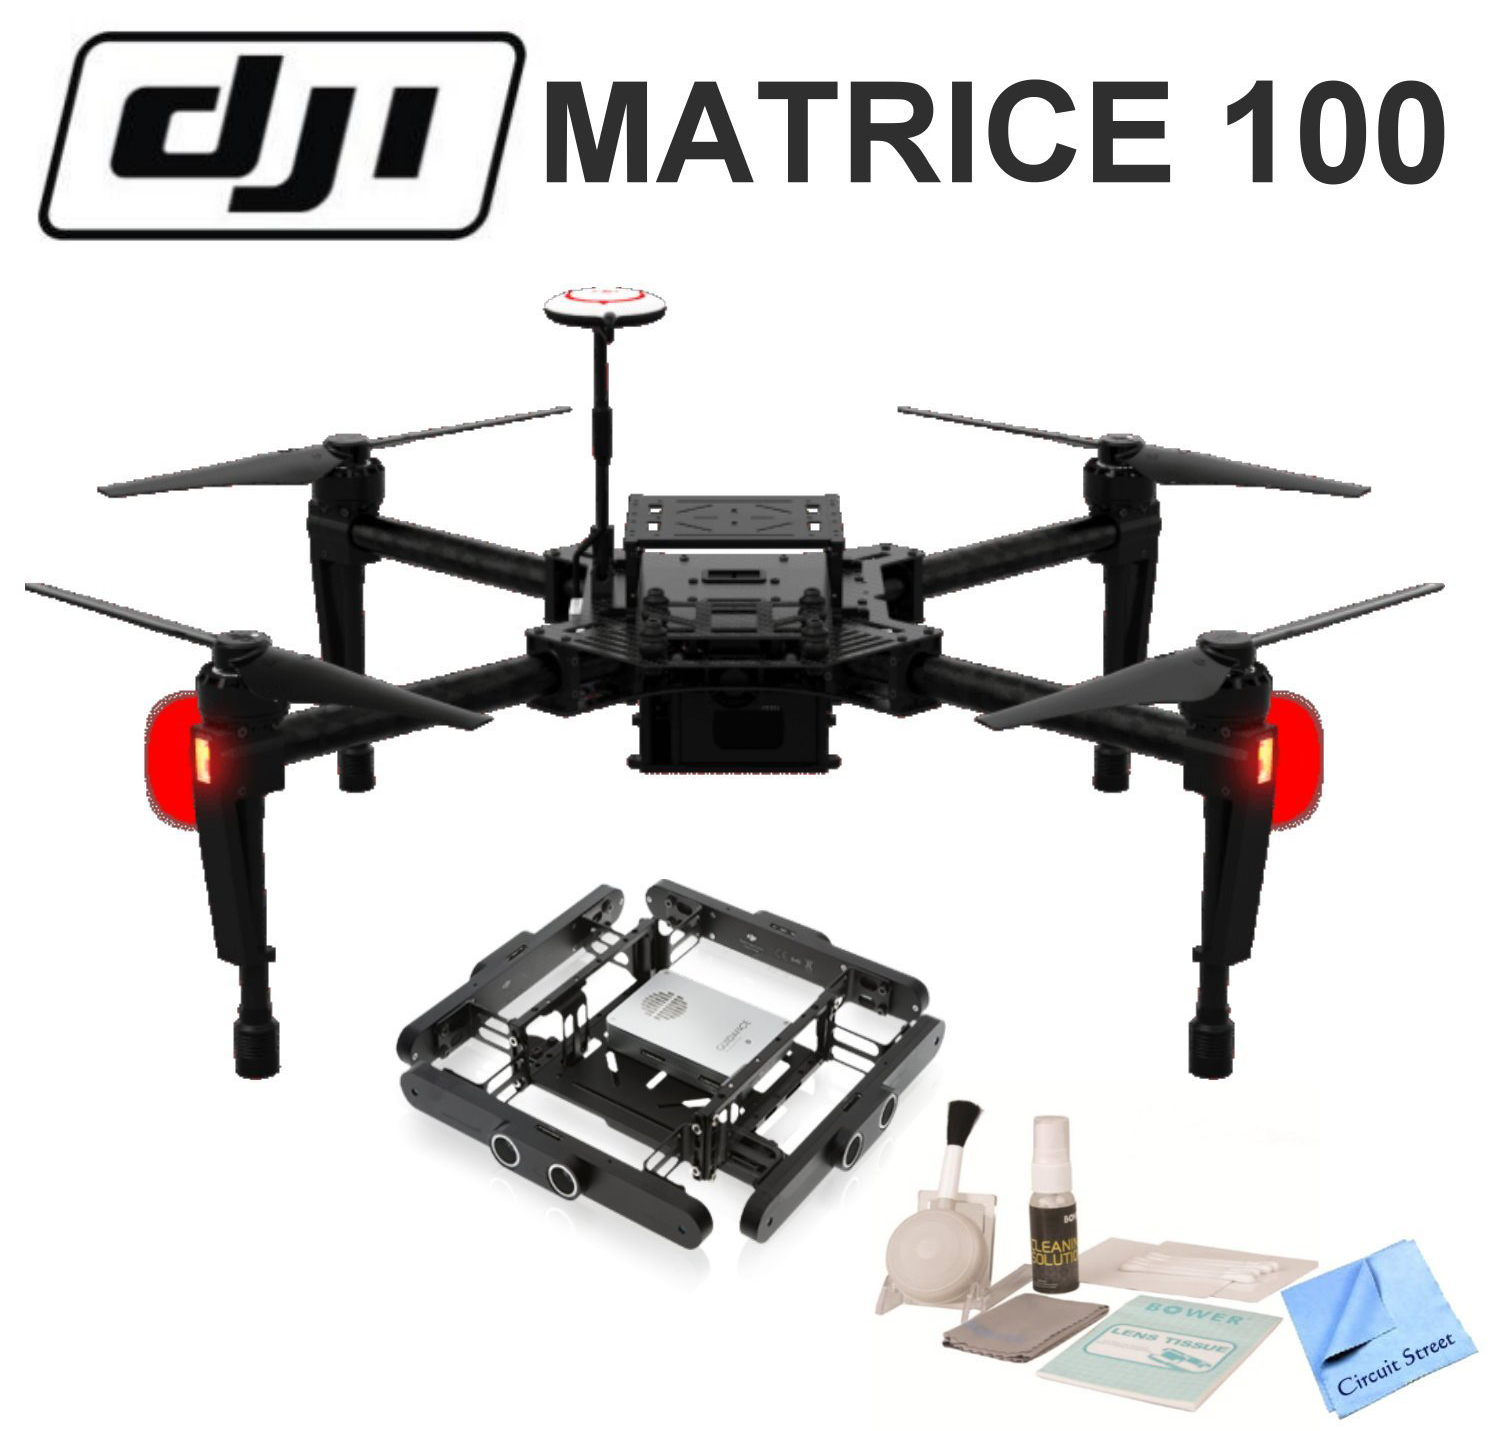 DJI Matrice 100 Price, Features, and Specs | Agriculture, Technology, Business Market